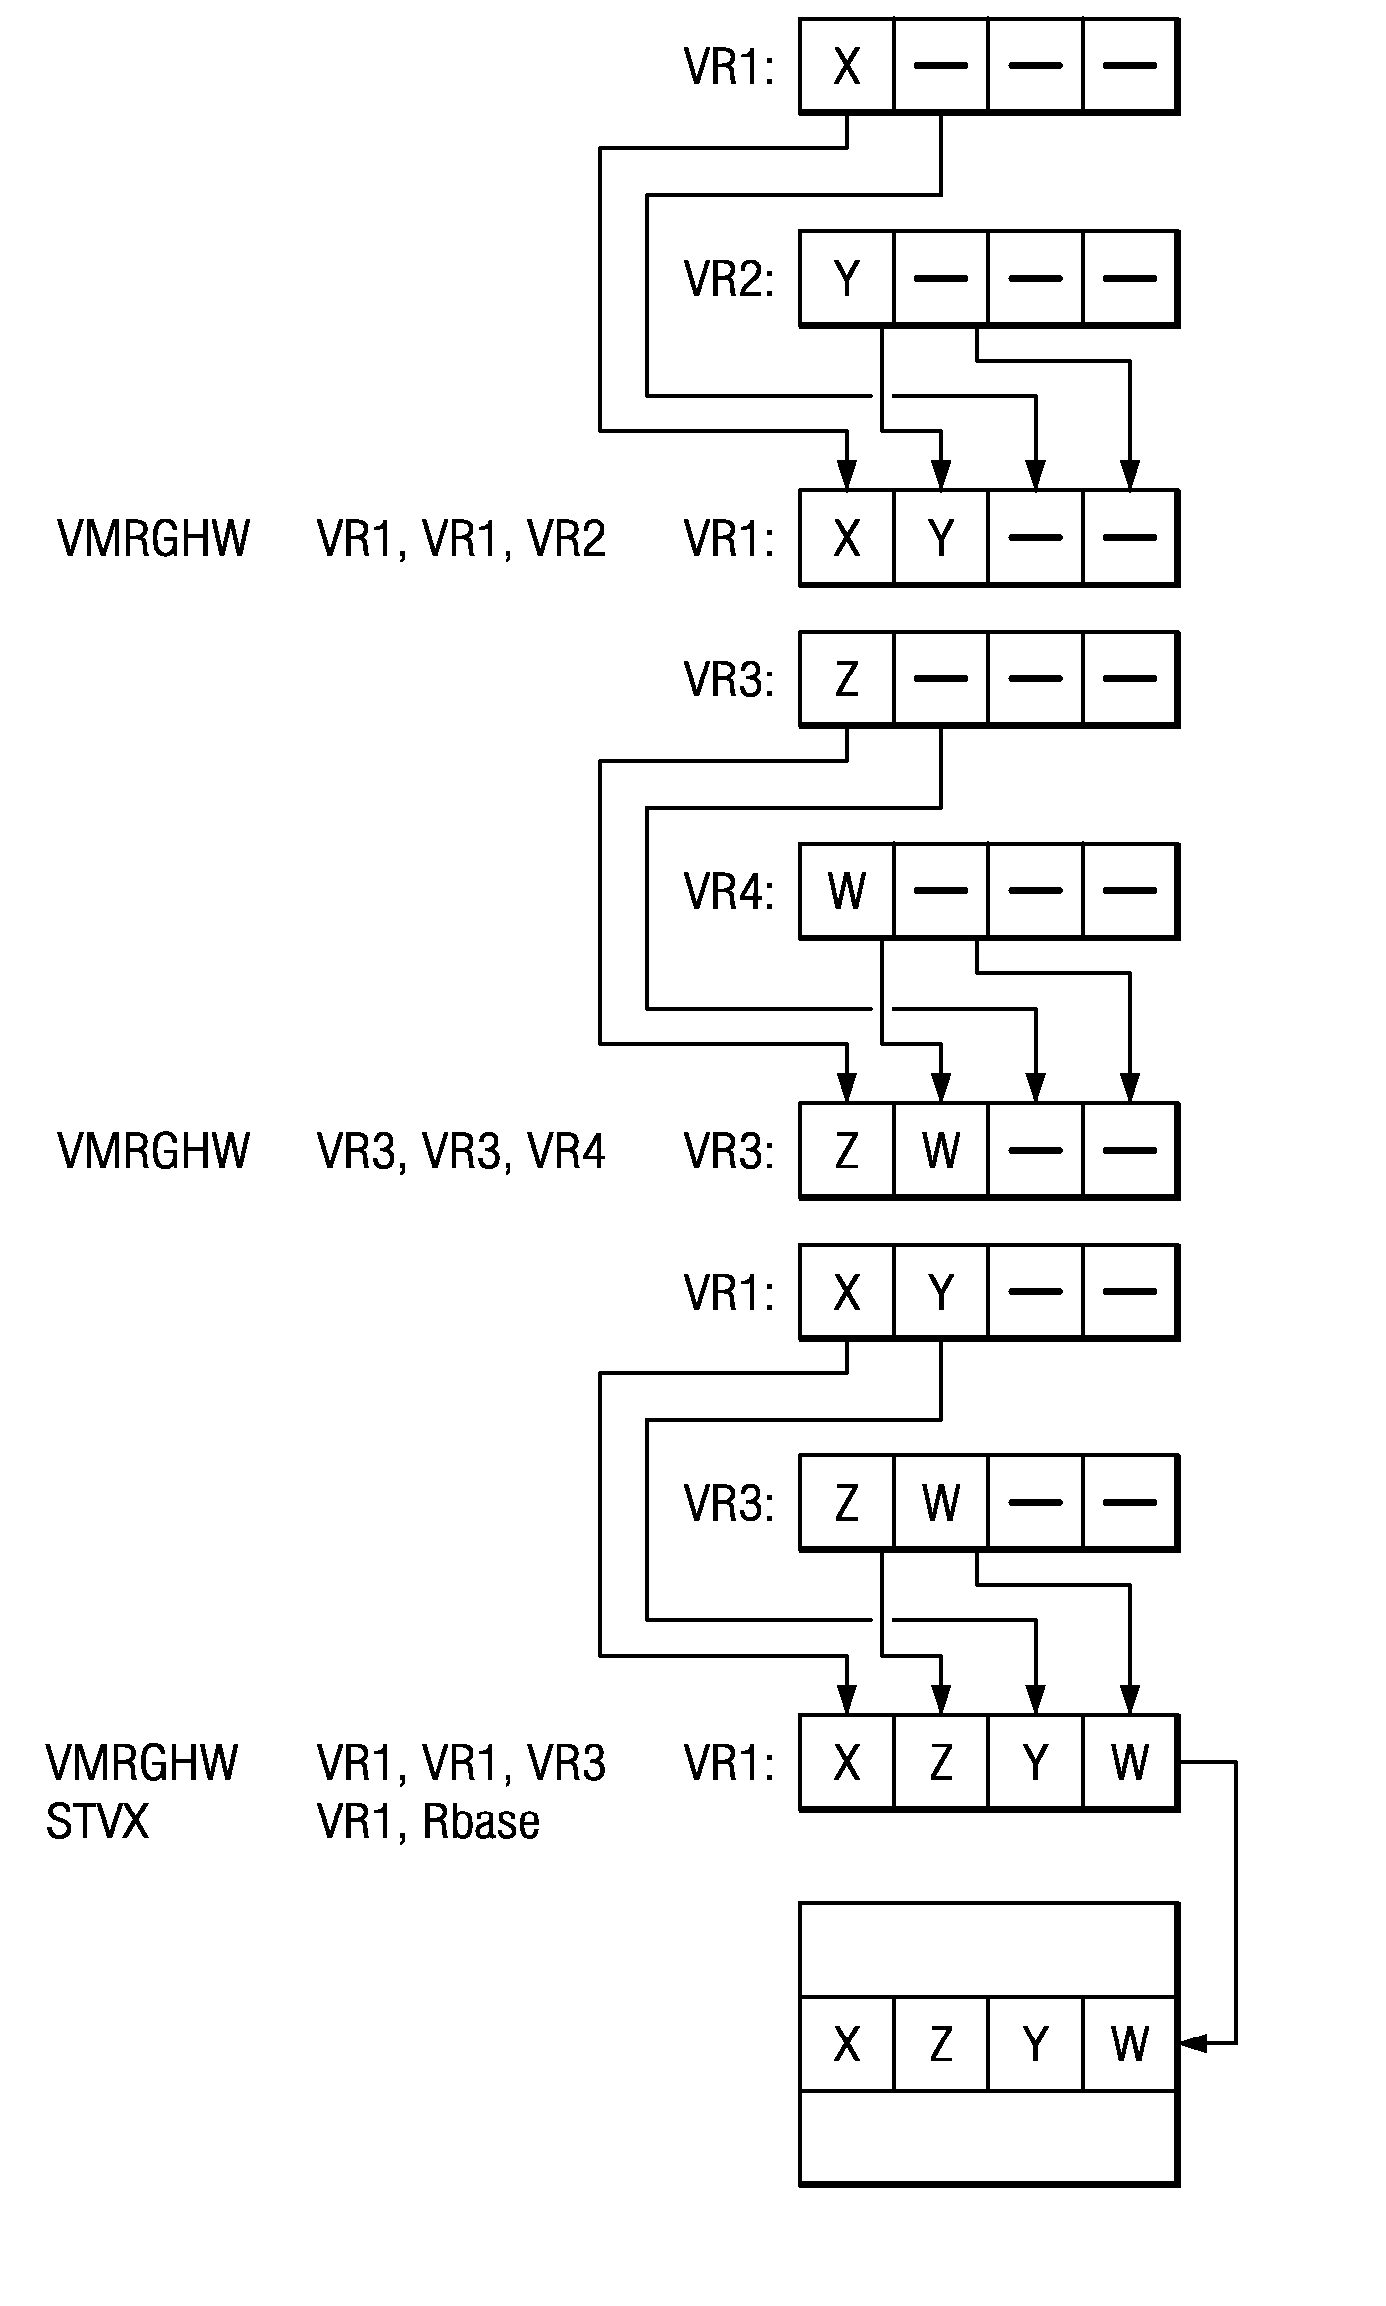 System and method for compiling scalar code for a single instruction multiple data (SIMD) execution engine